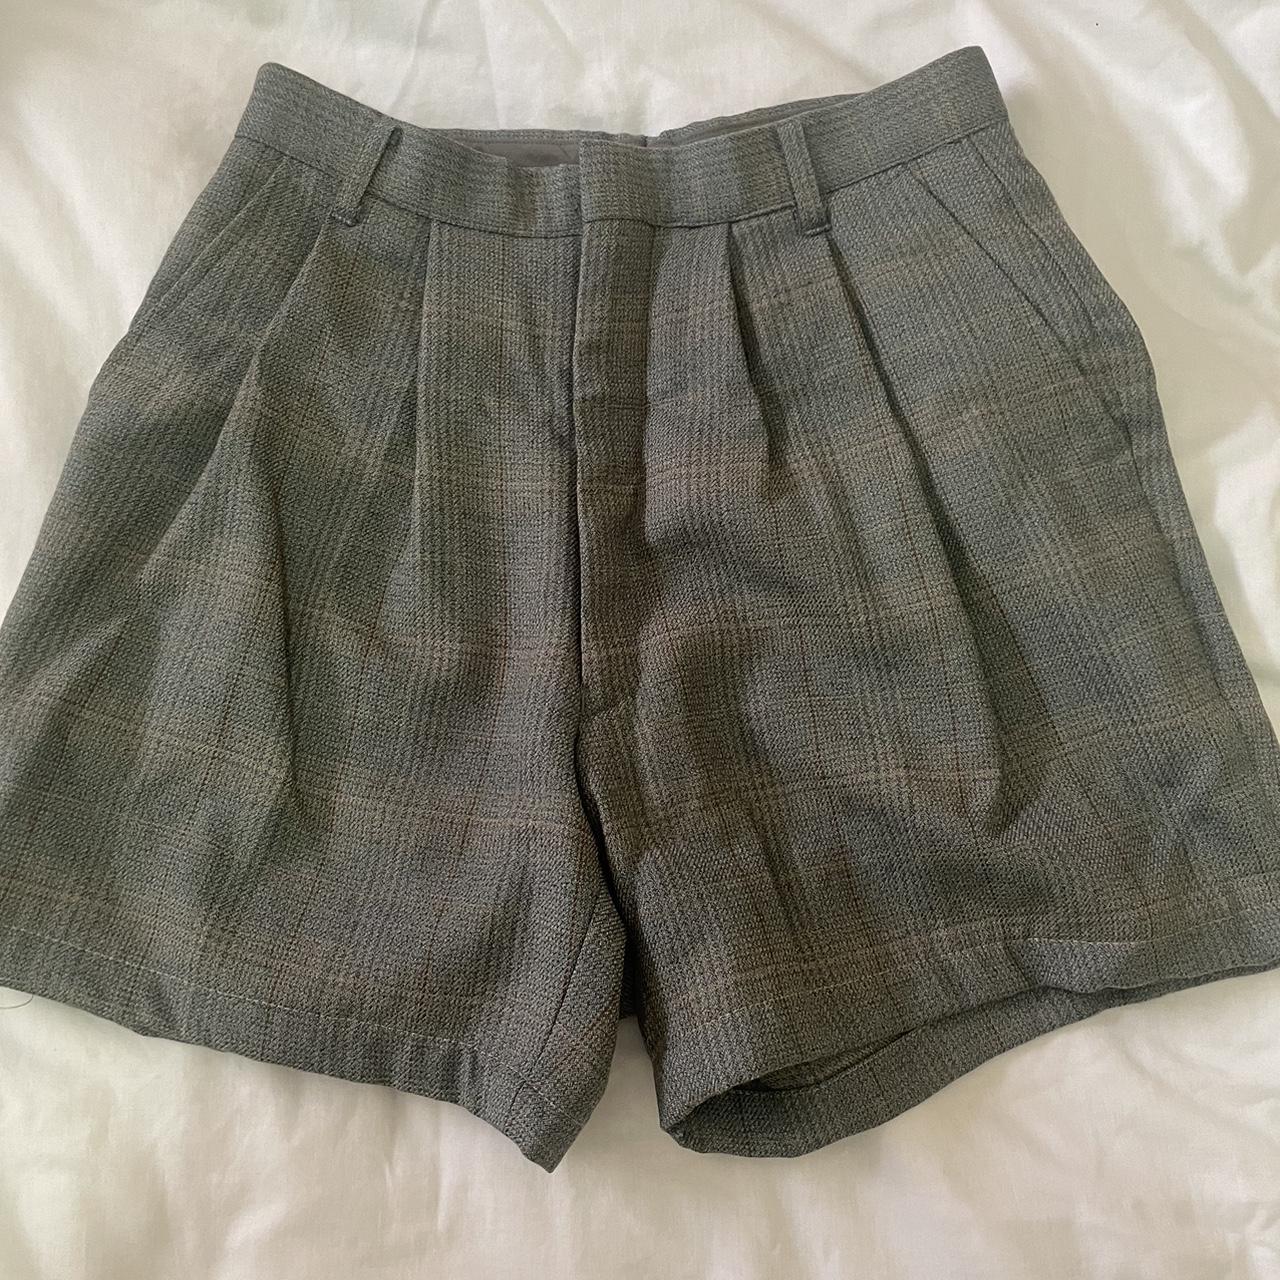 Tailored pant shorts. Bought from vintage store a... - Depop